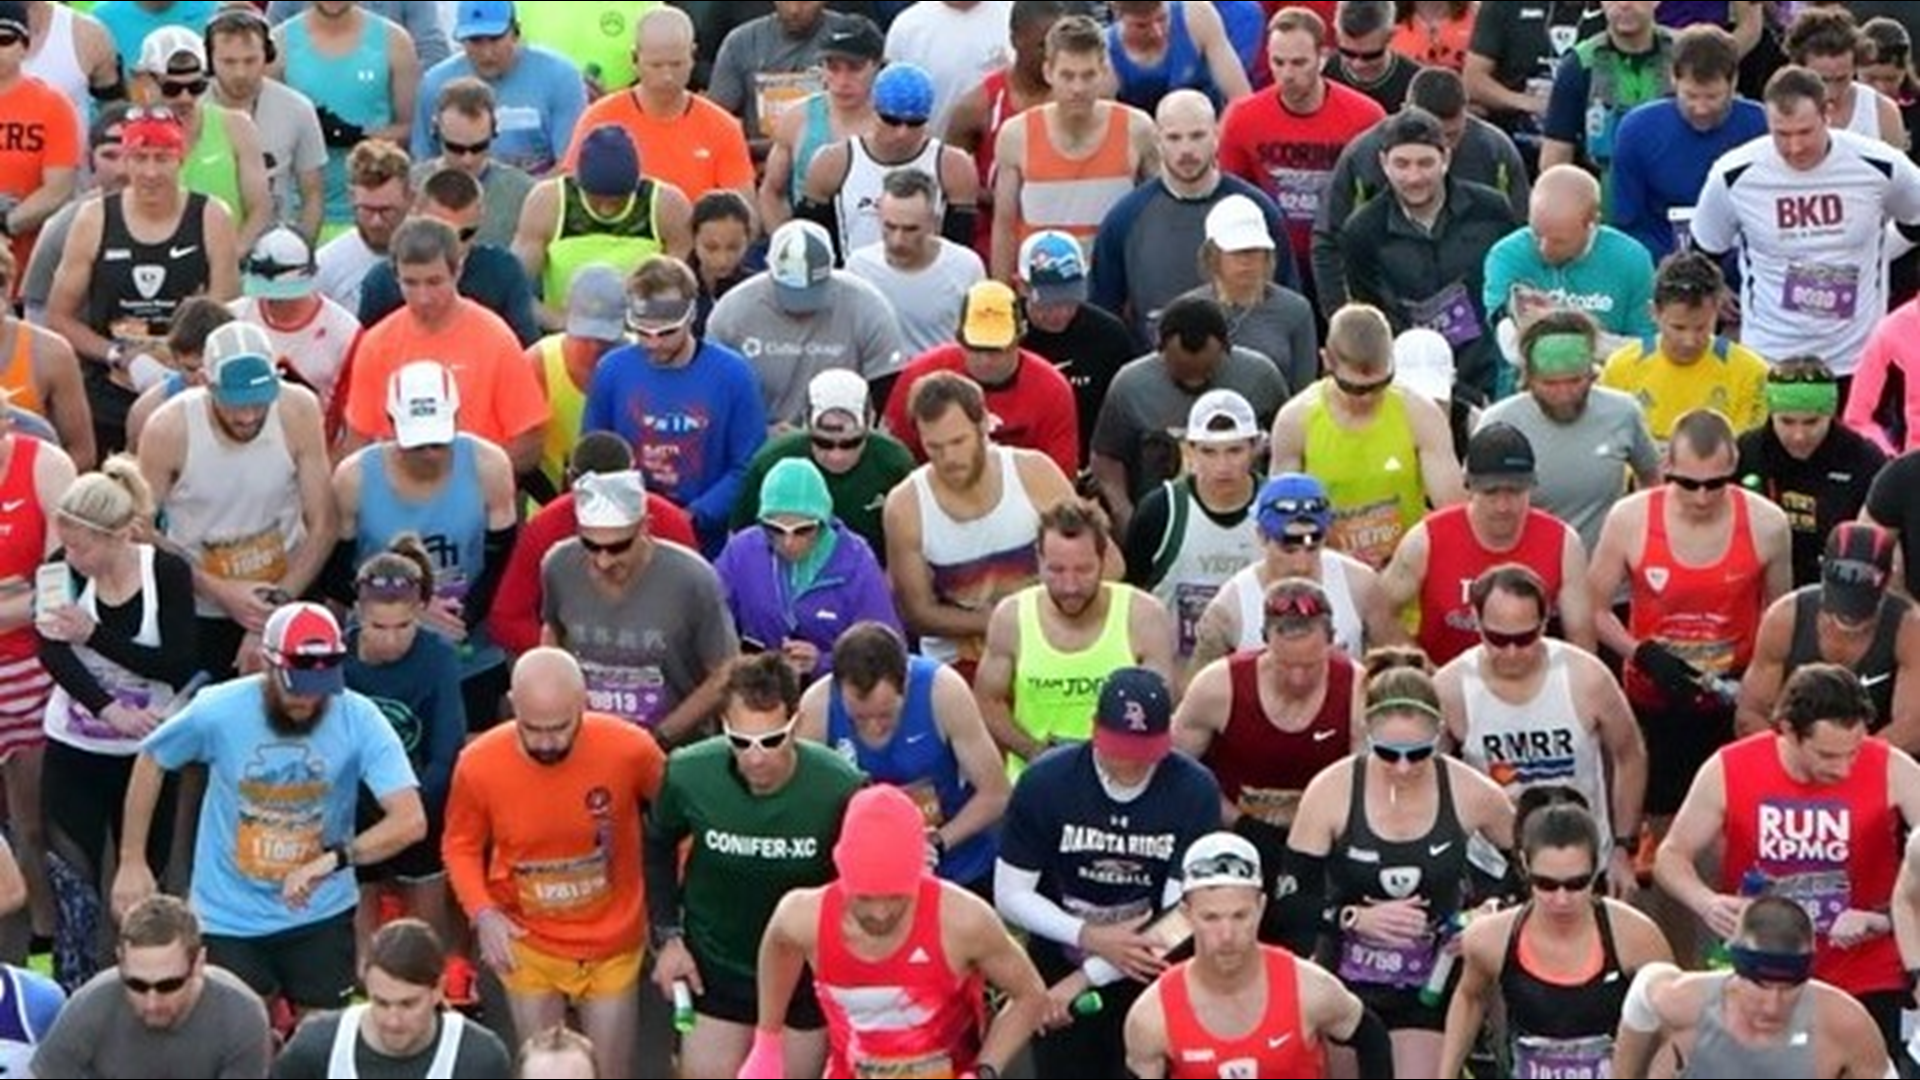 Denver Colfax Marathon announced new title sponsorship agreement with Cigna. The 16th Denver Colfax Marathon is scheduled for May 13-15, 2022.